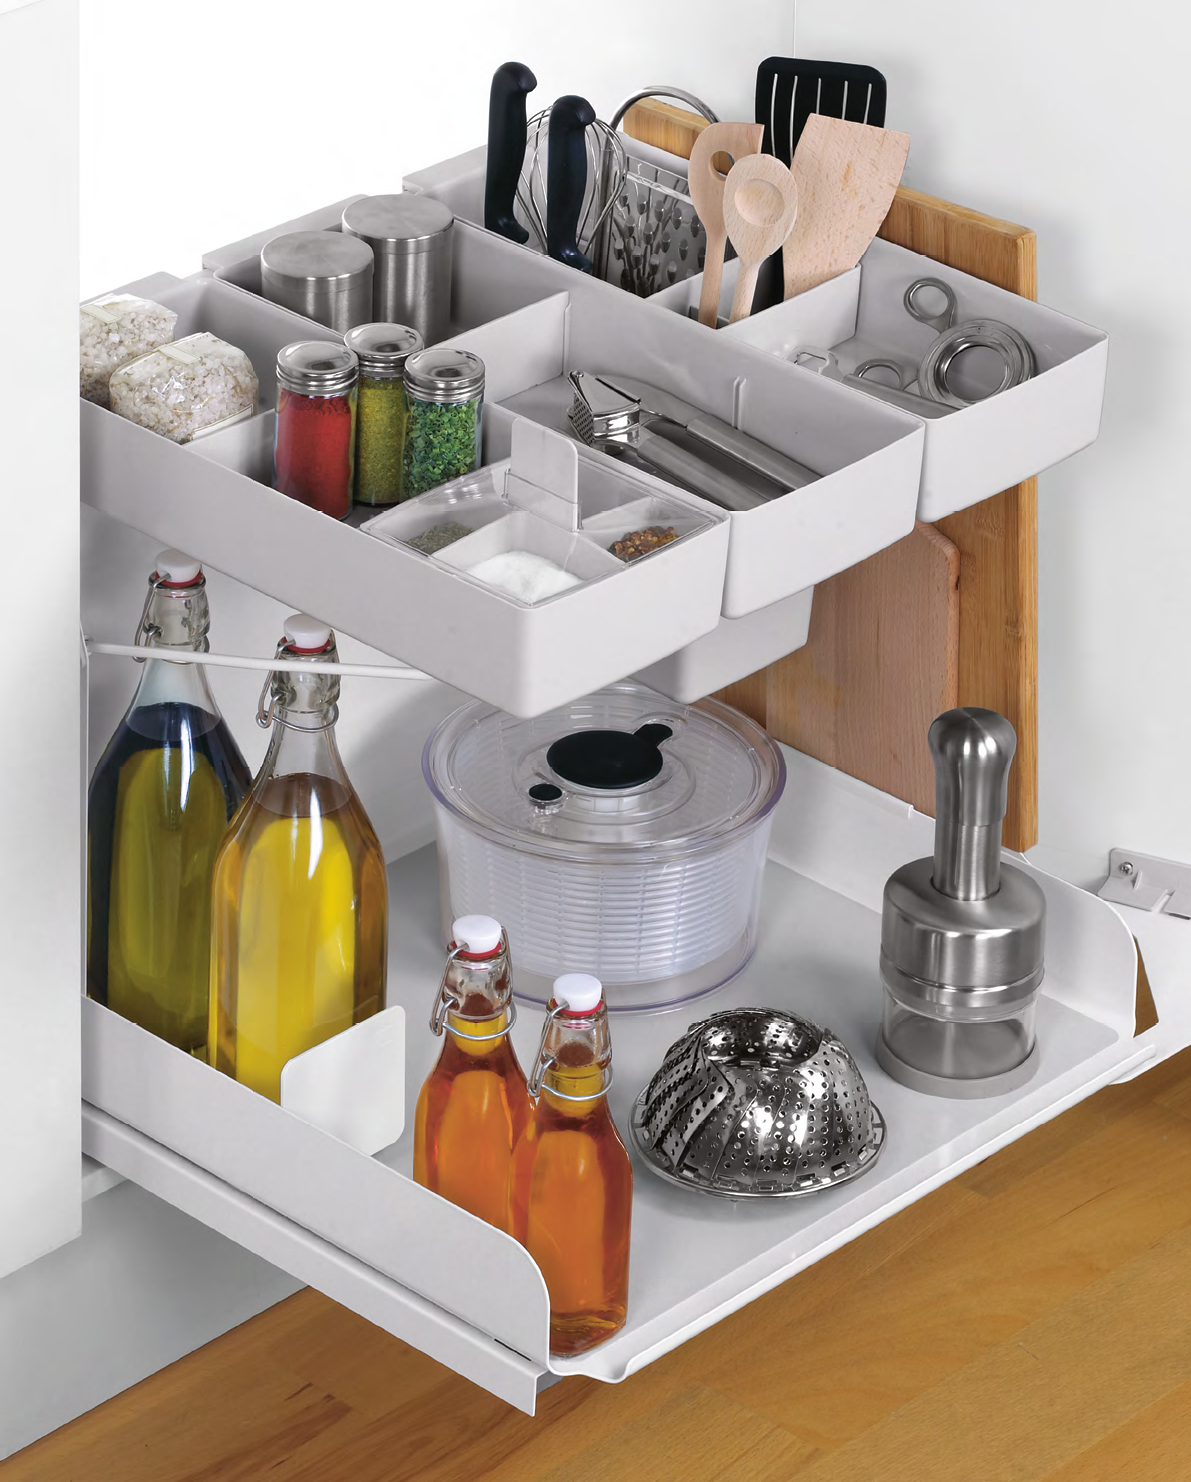 02_Kitchen-Tower_ENG_Page_1_Image_0001.png